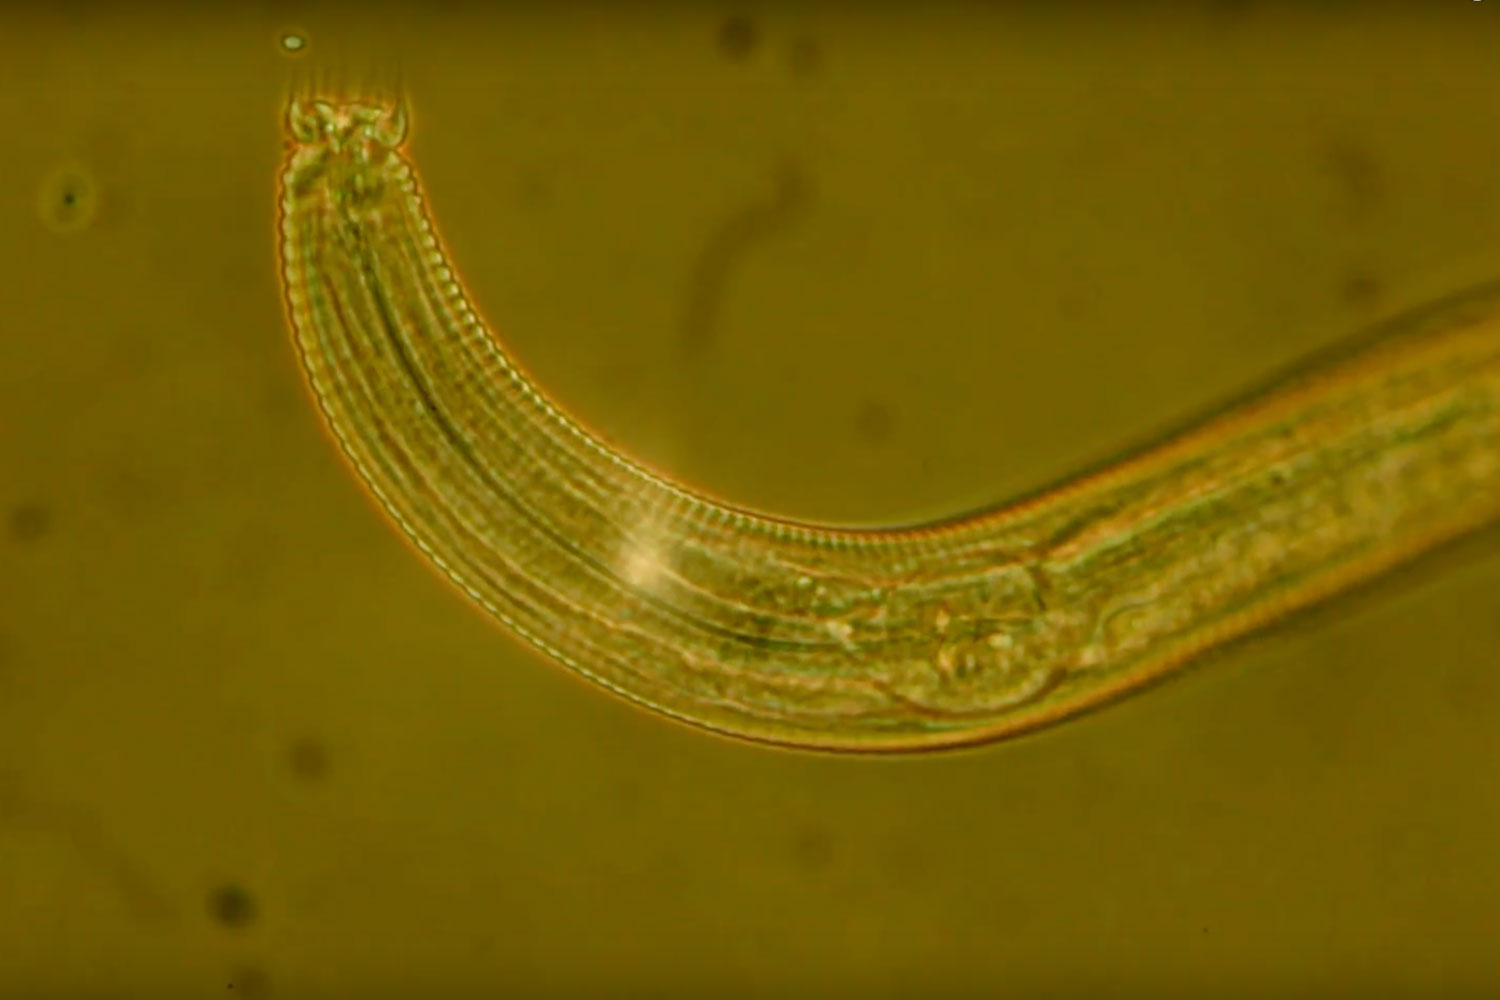 A photo of a nematode worm under the microscope